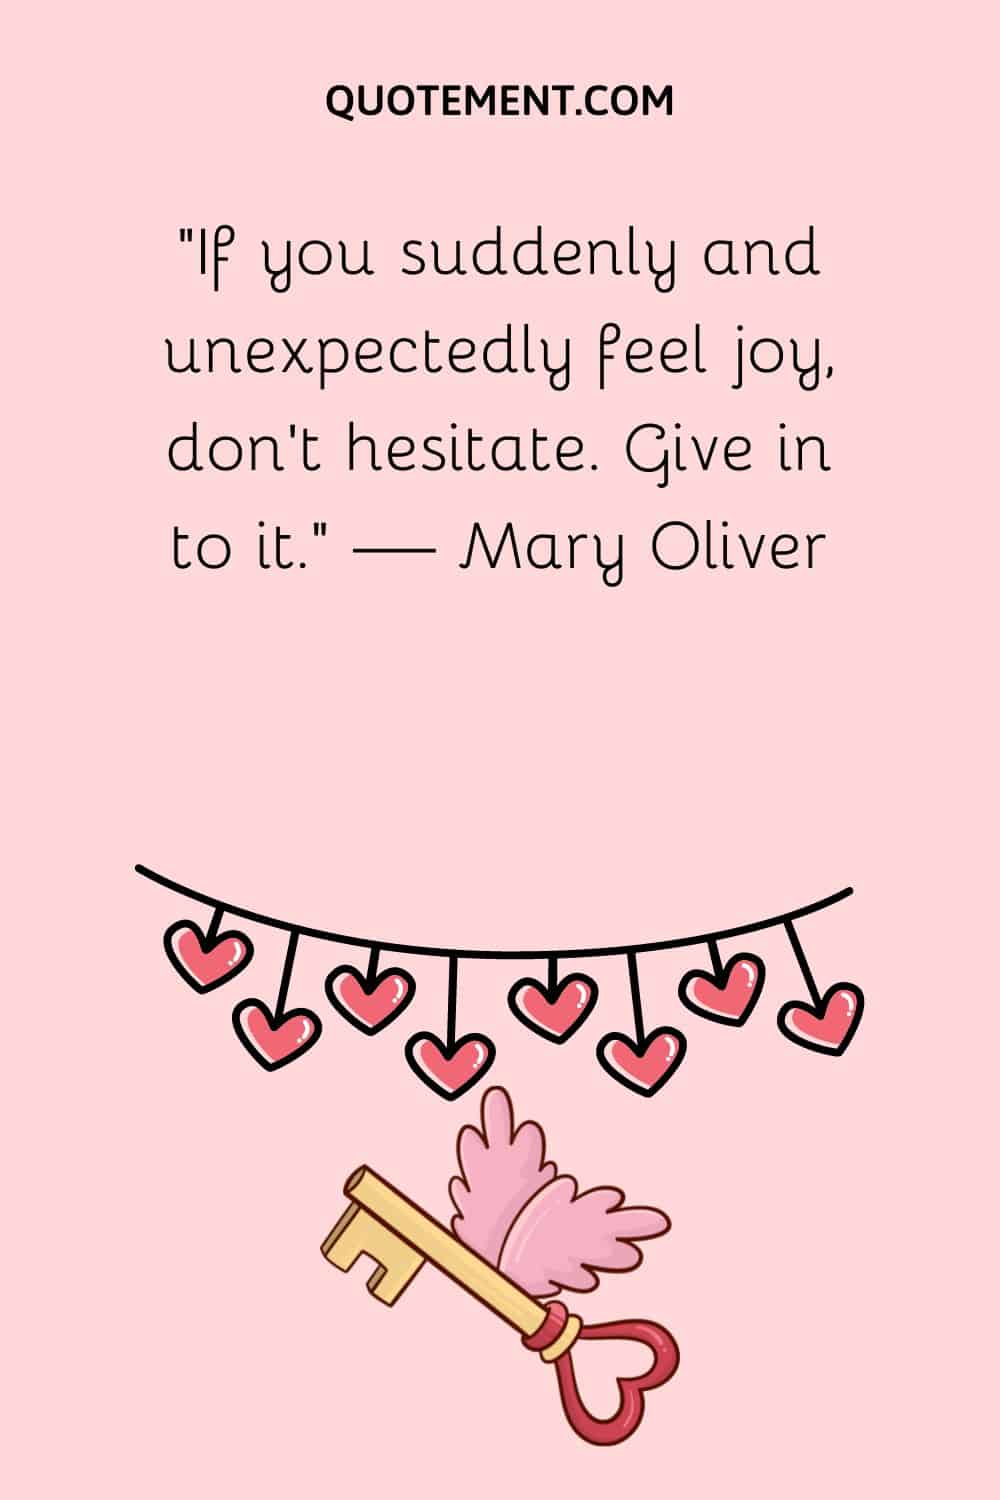 “If you suddenly and unexpectedly feel joy, don't hesitate. Give in to it.” — Mary Oliver